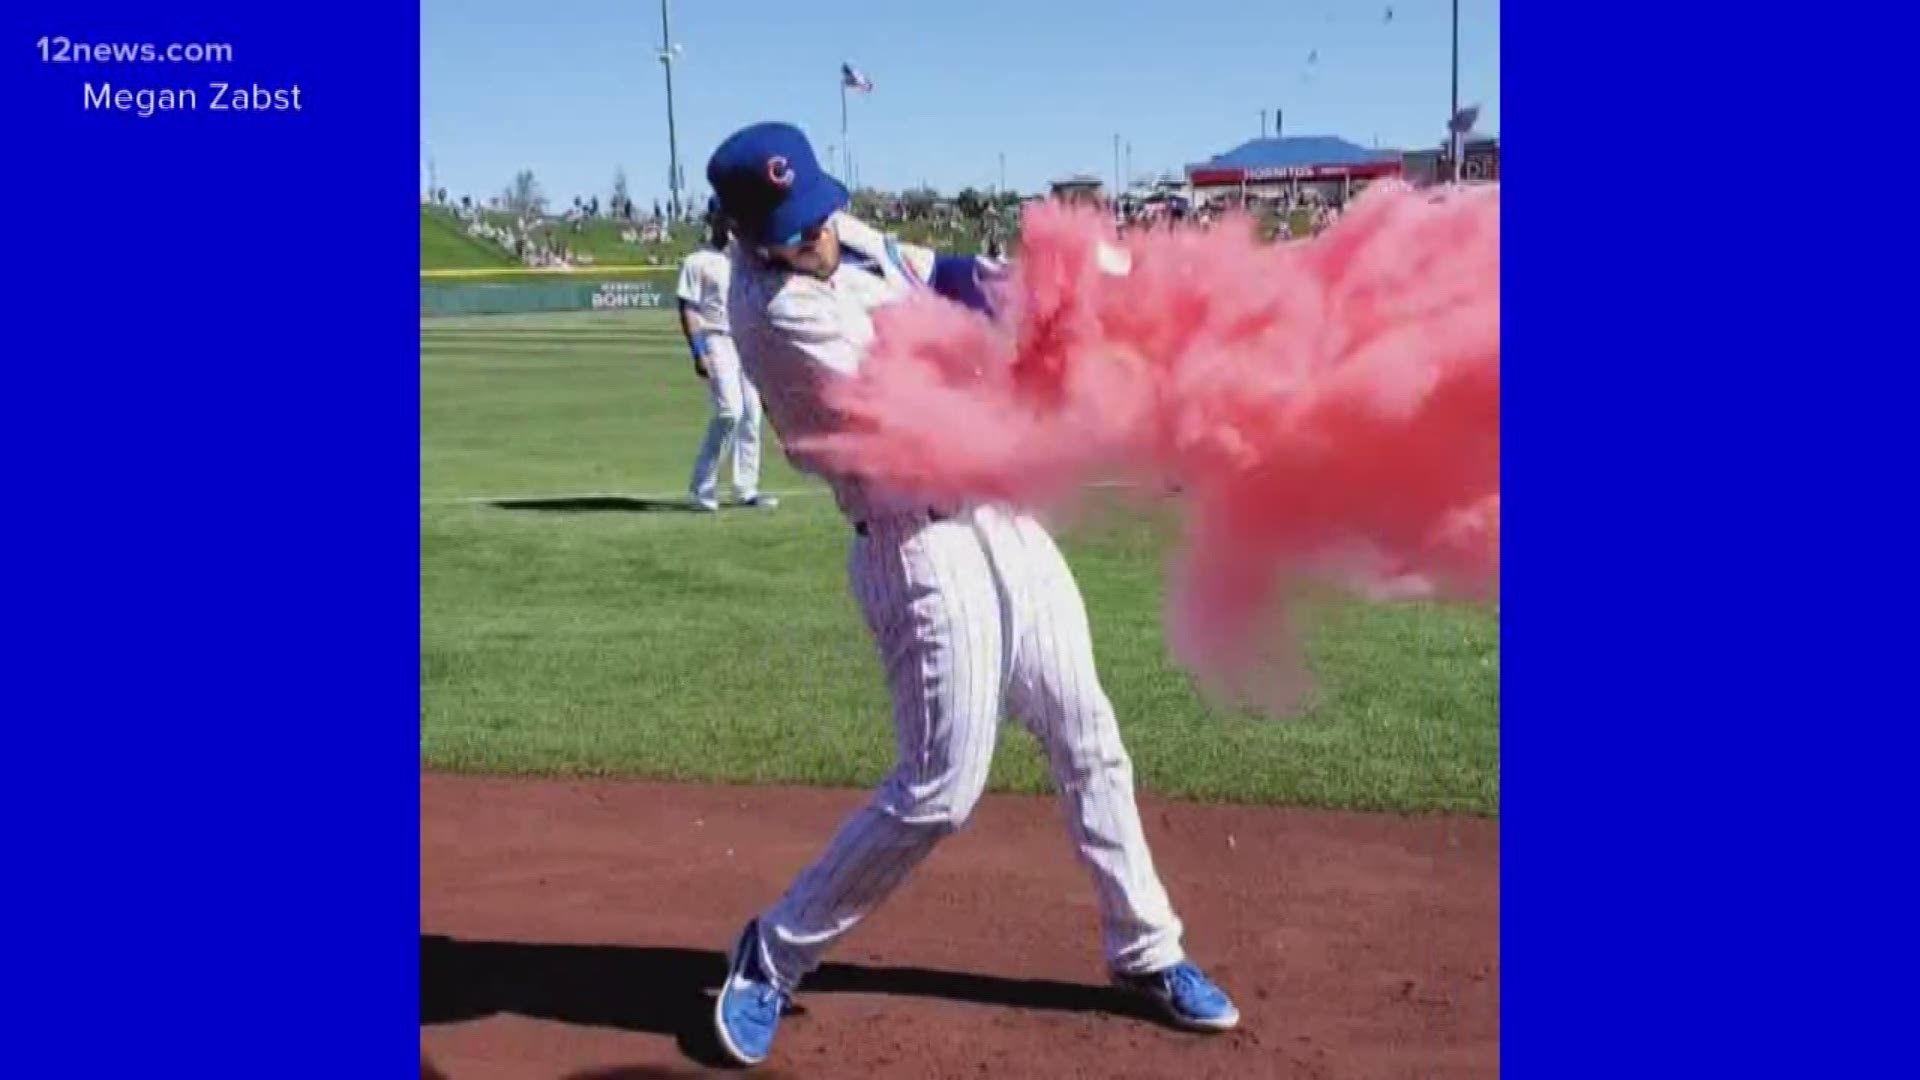 Chicago Cubs Players Conduct Grand Slam Proposals to Their Girlfriends